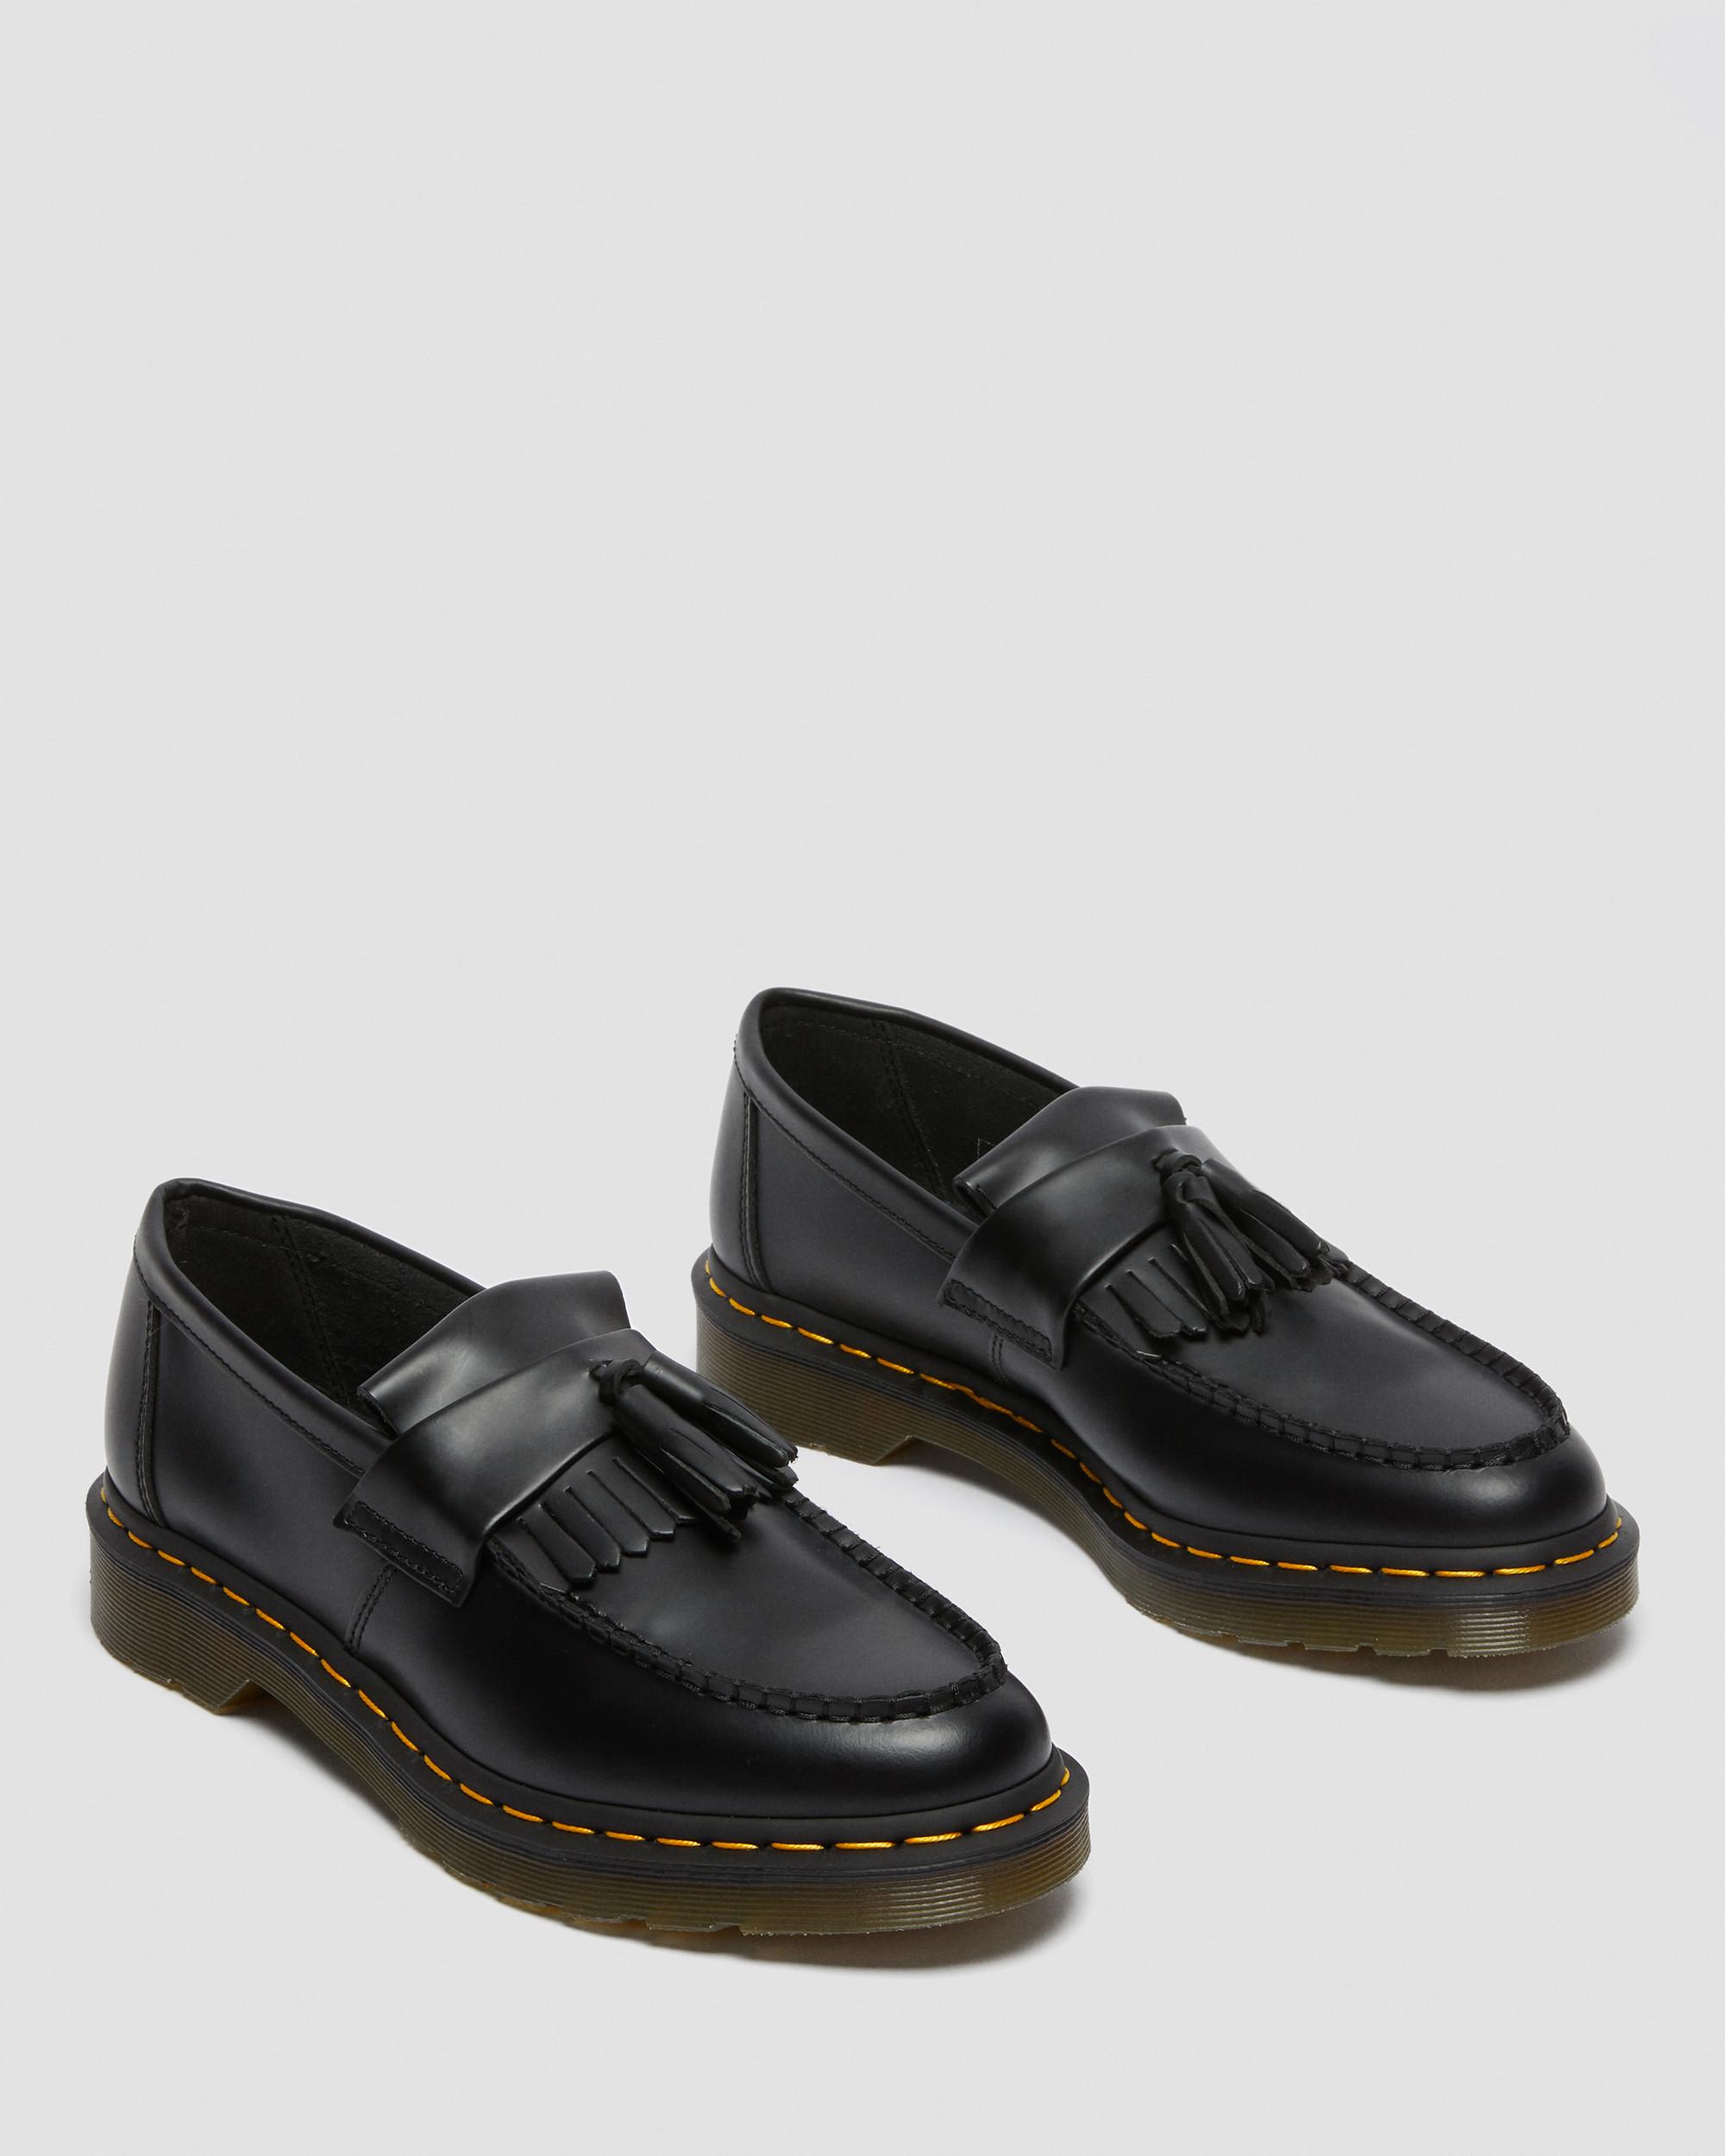 Adrian Yellow Stitch Smooth Leather Tassel Loafers | Dr. Martens